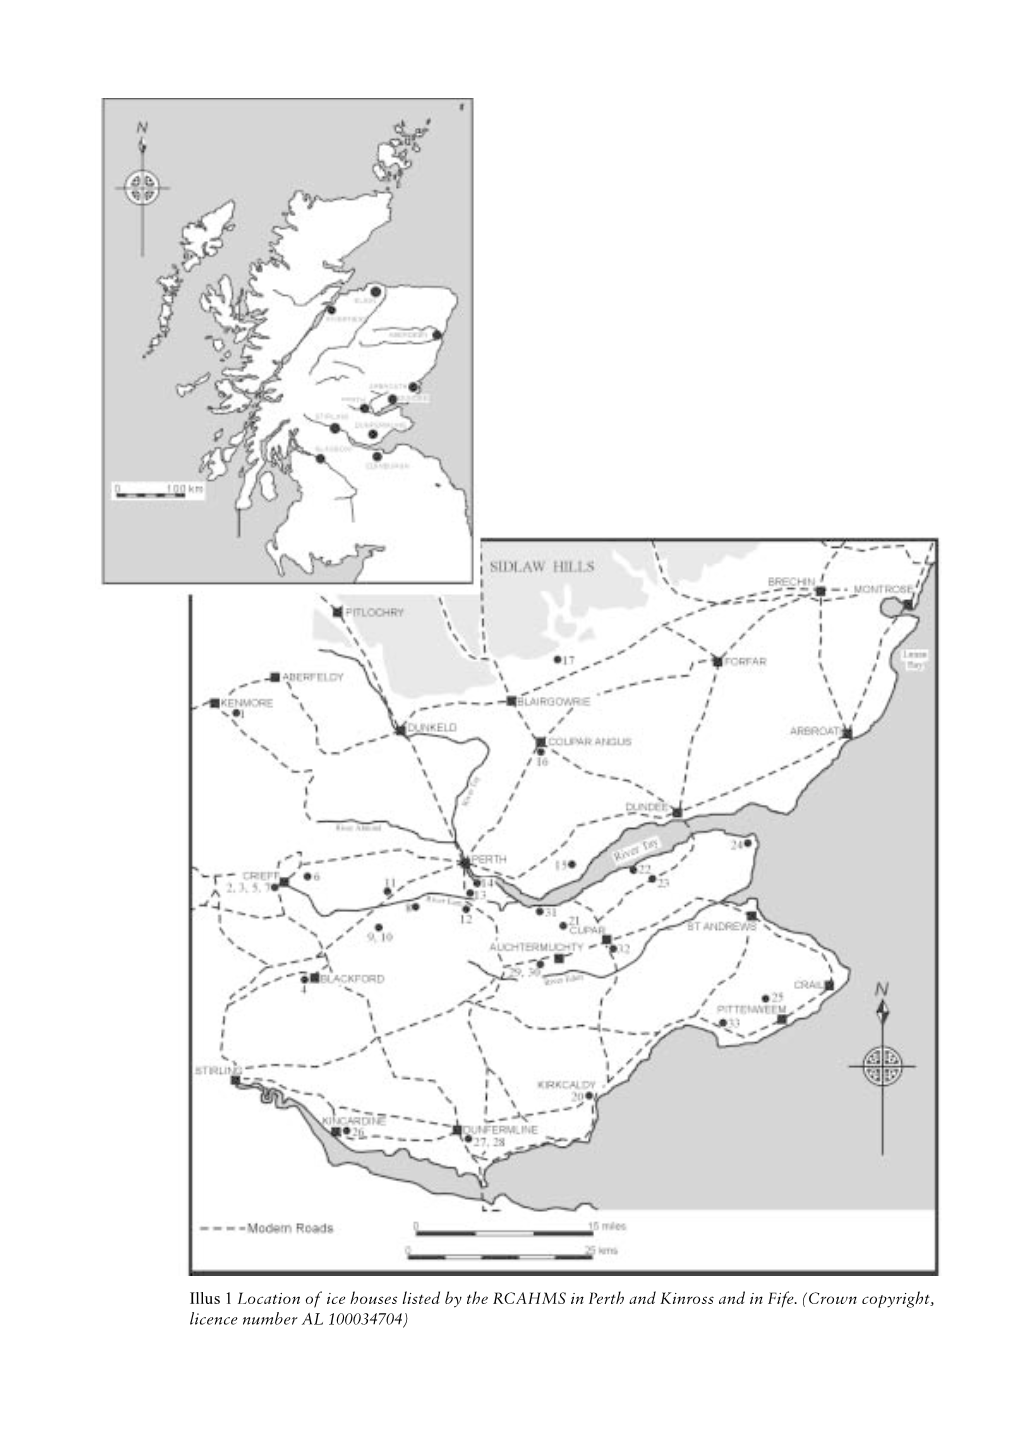 Illus 1 Location of Ice Houses Listed by the RCAHMS in Perth and Kinross and in Fife